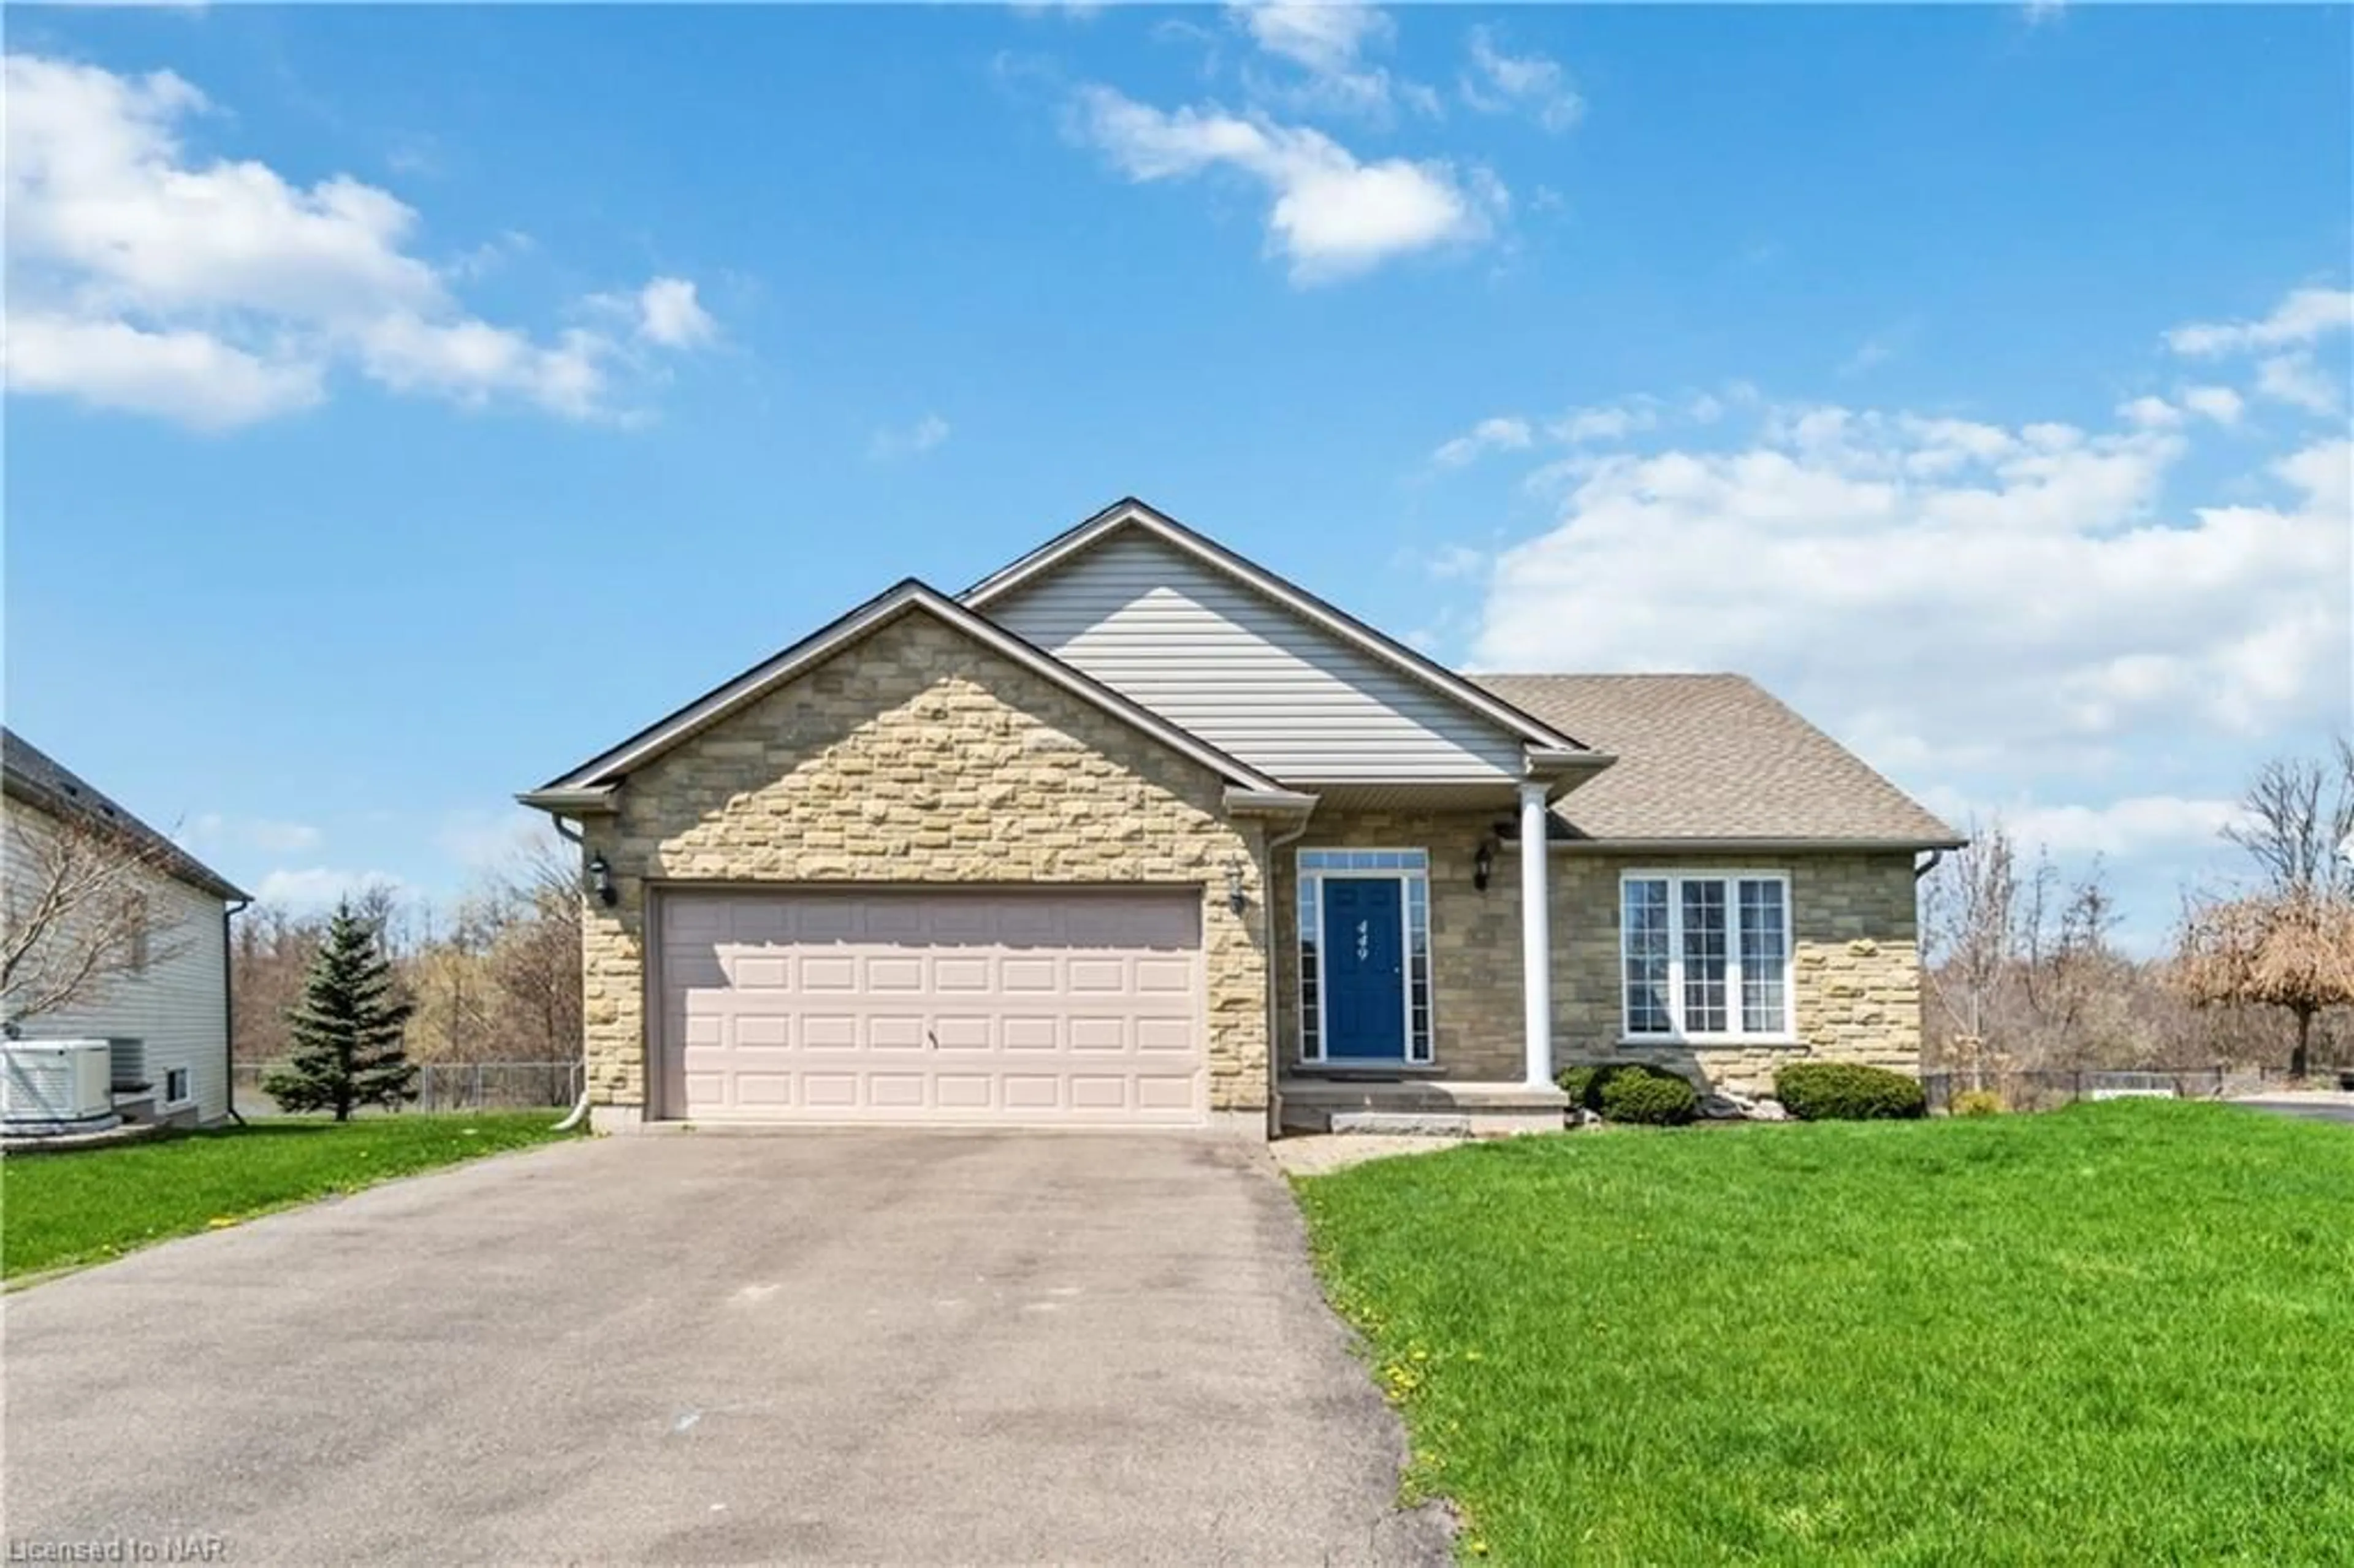 Frontside or backside of a home for 449 Barrington Crt, Ridgeway Ontario L0S 1N0